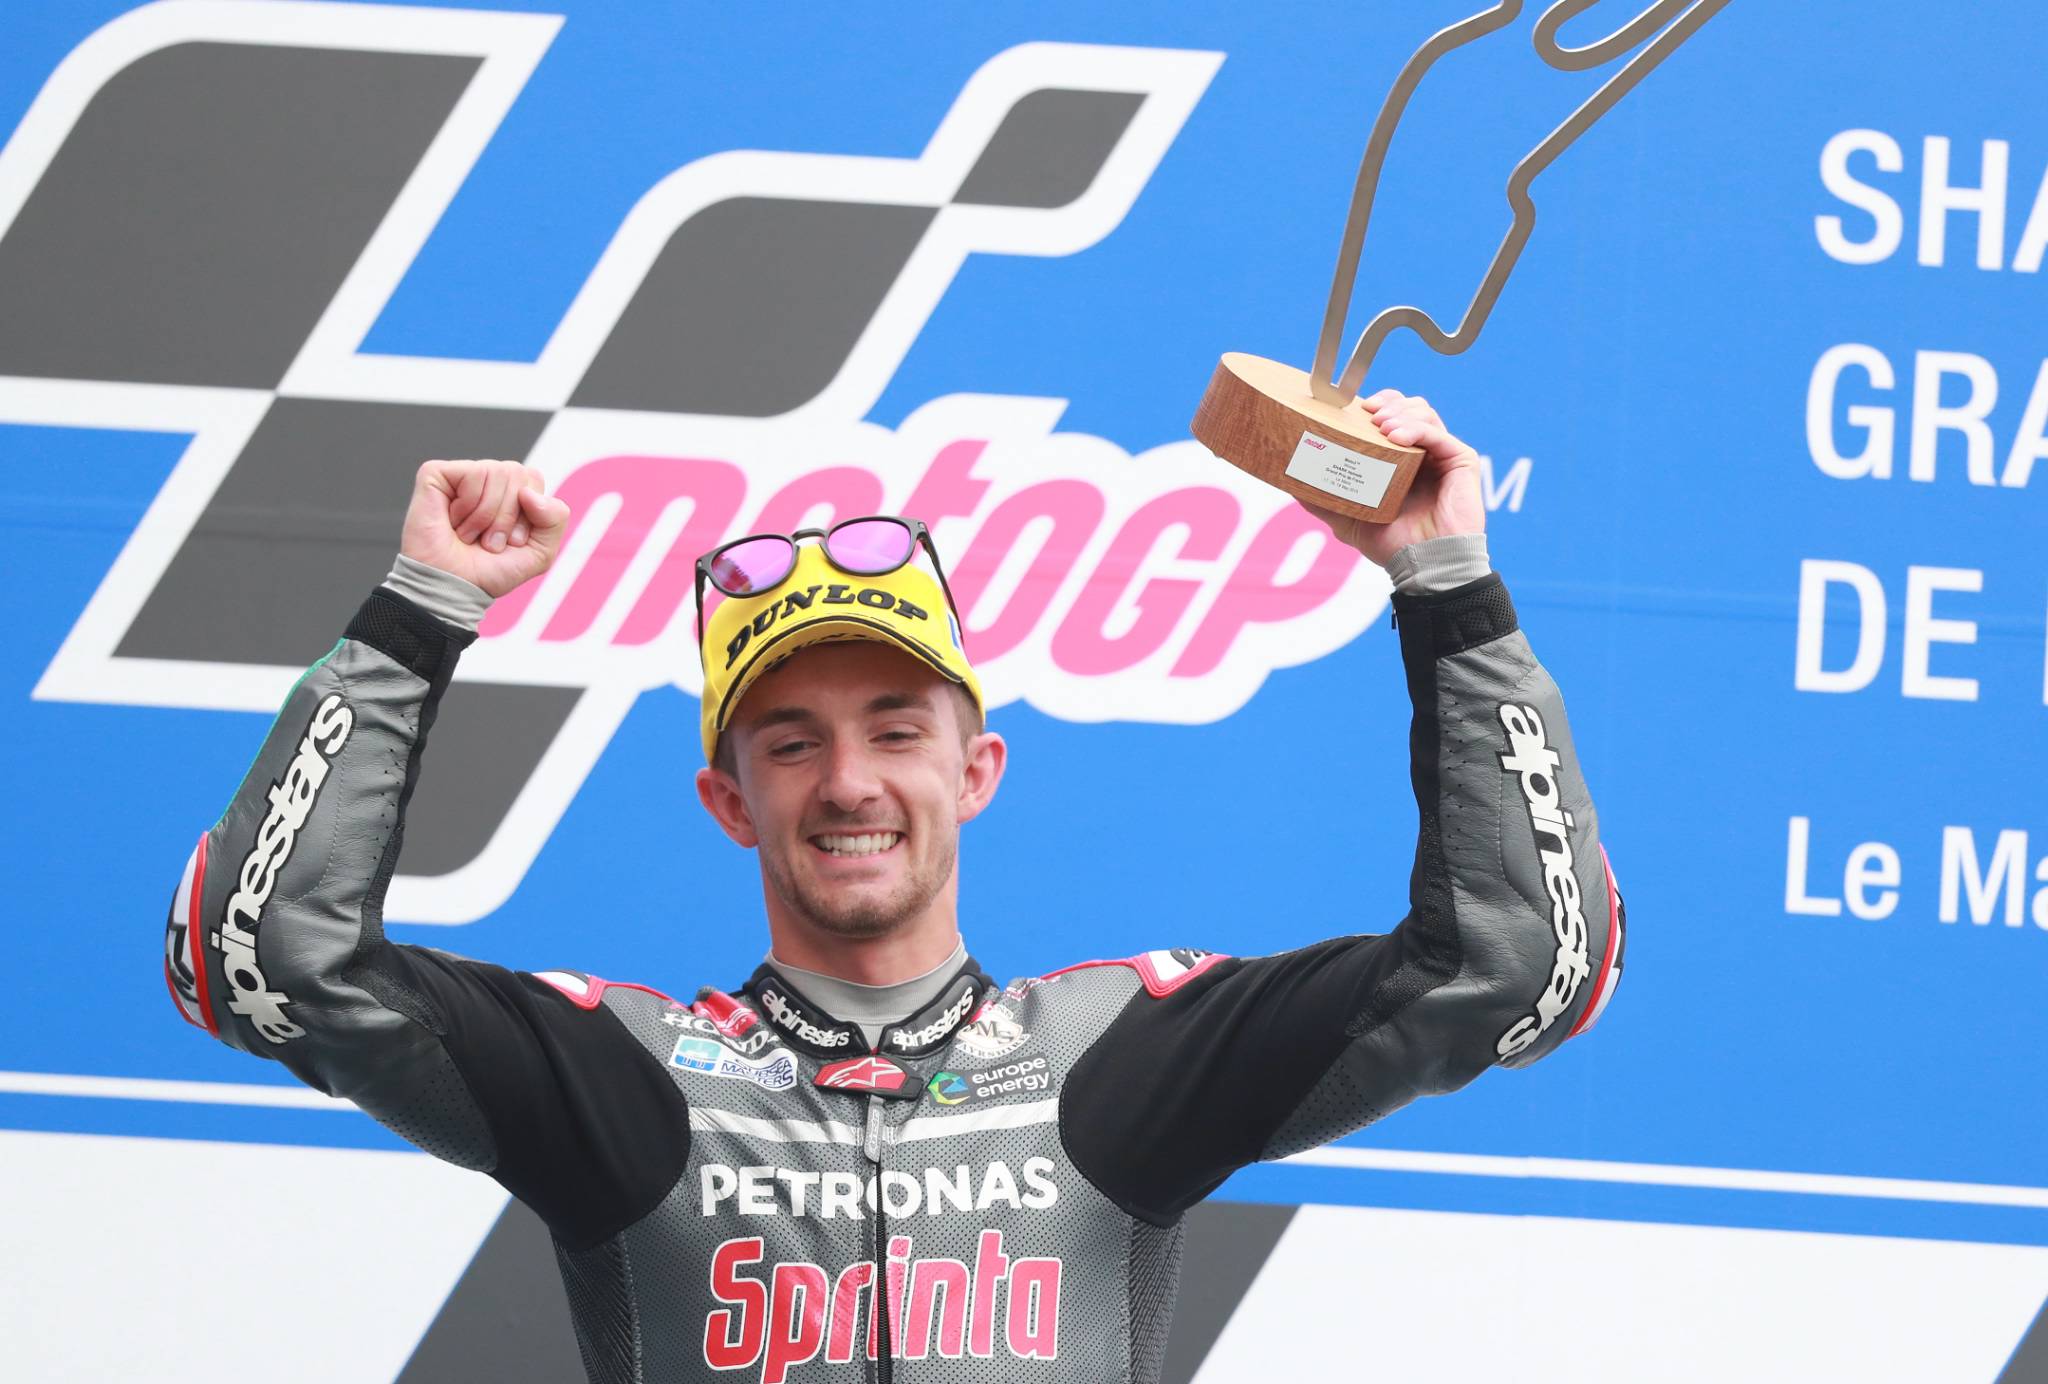 'Absolutely delighted' - McPhee makes history for Sepang